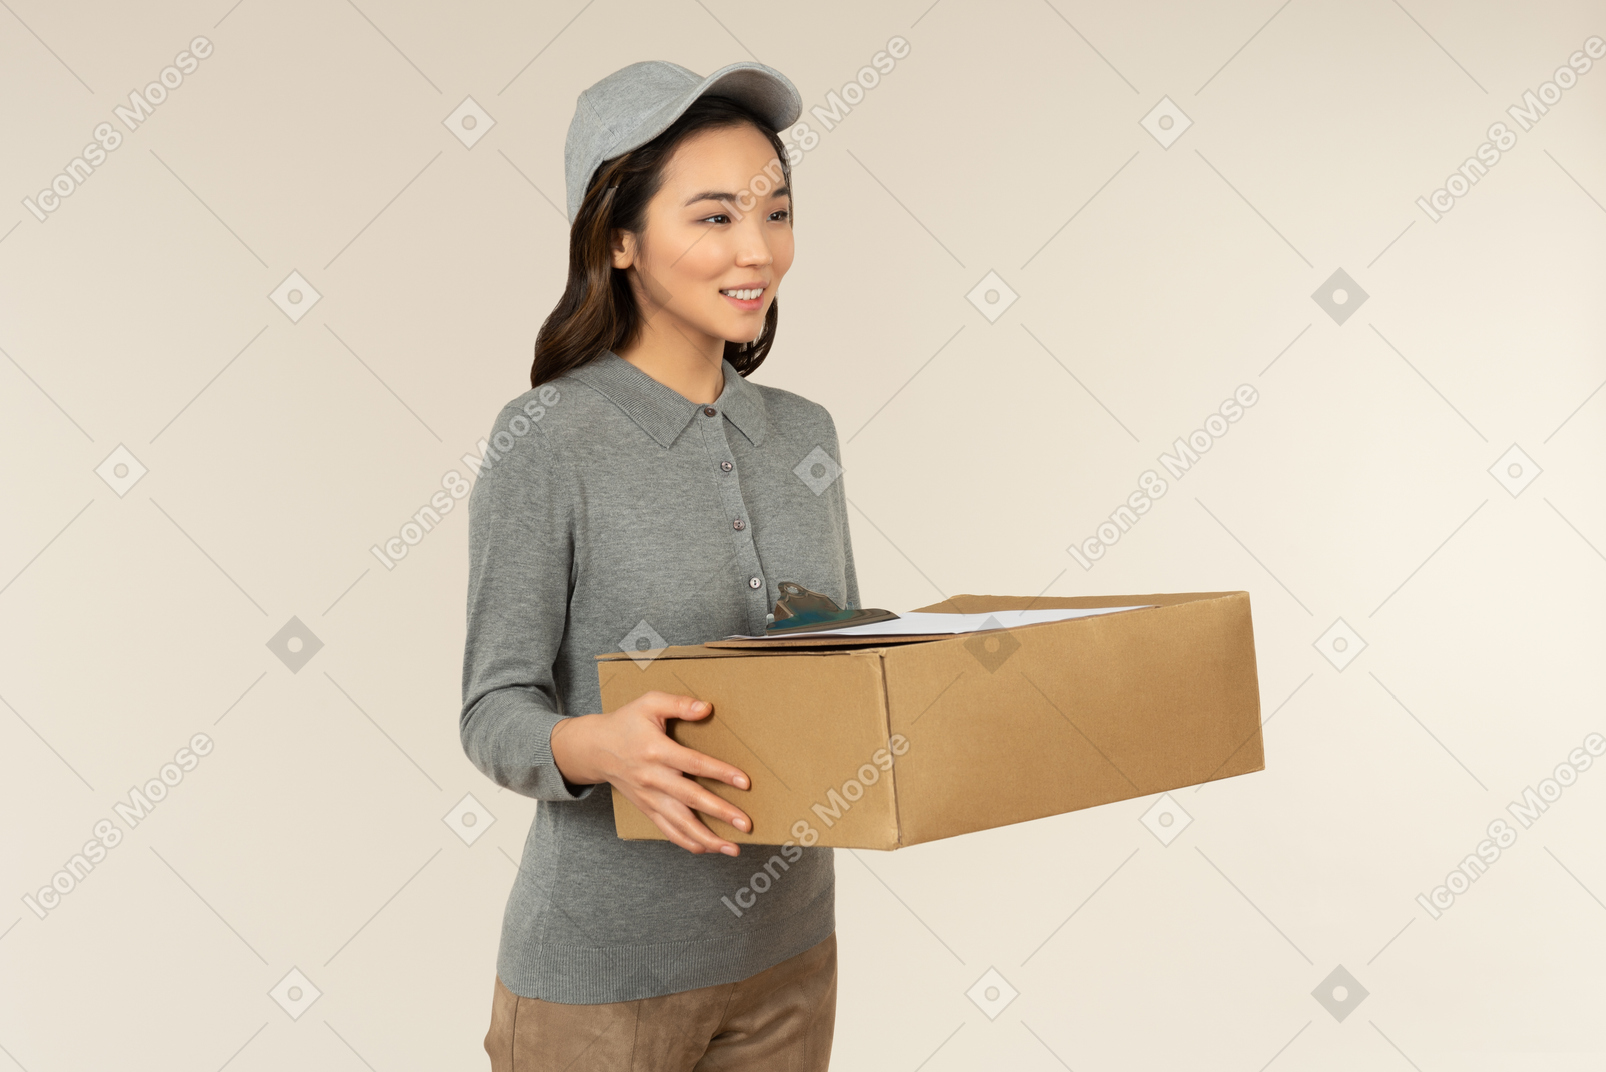 Here you have your parcel